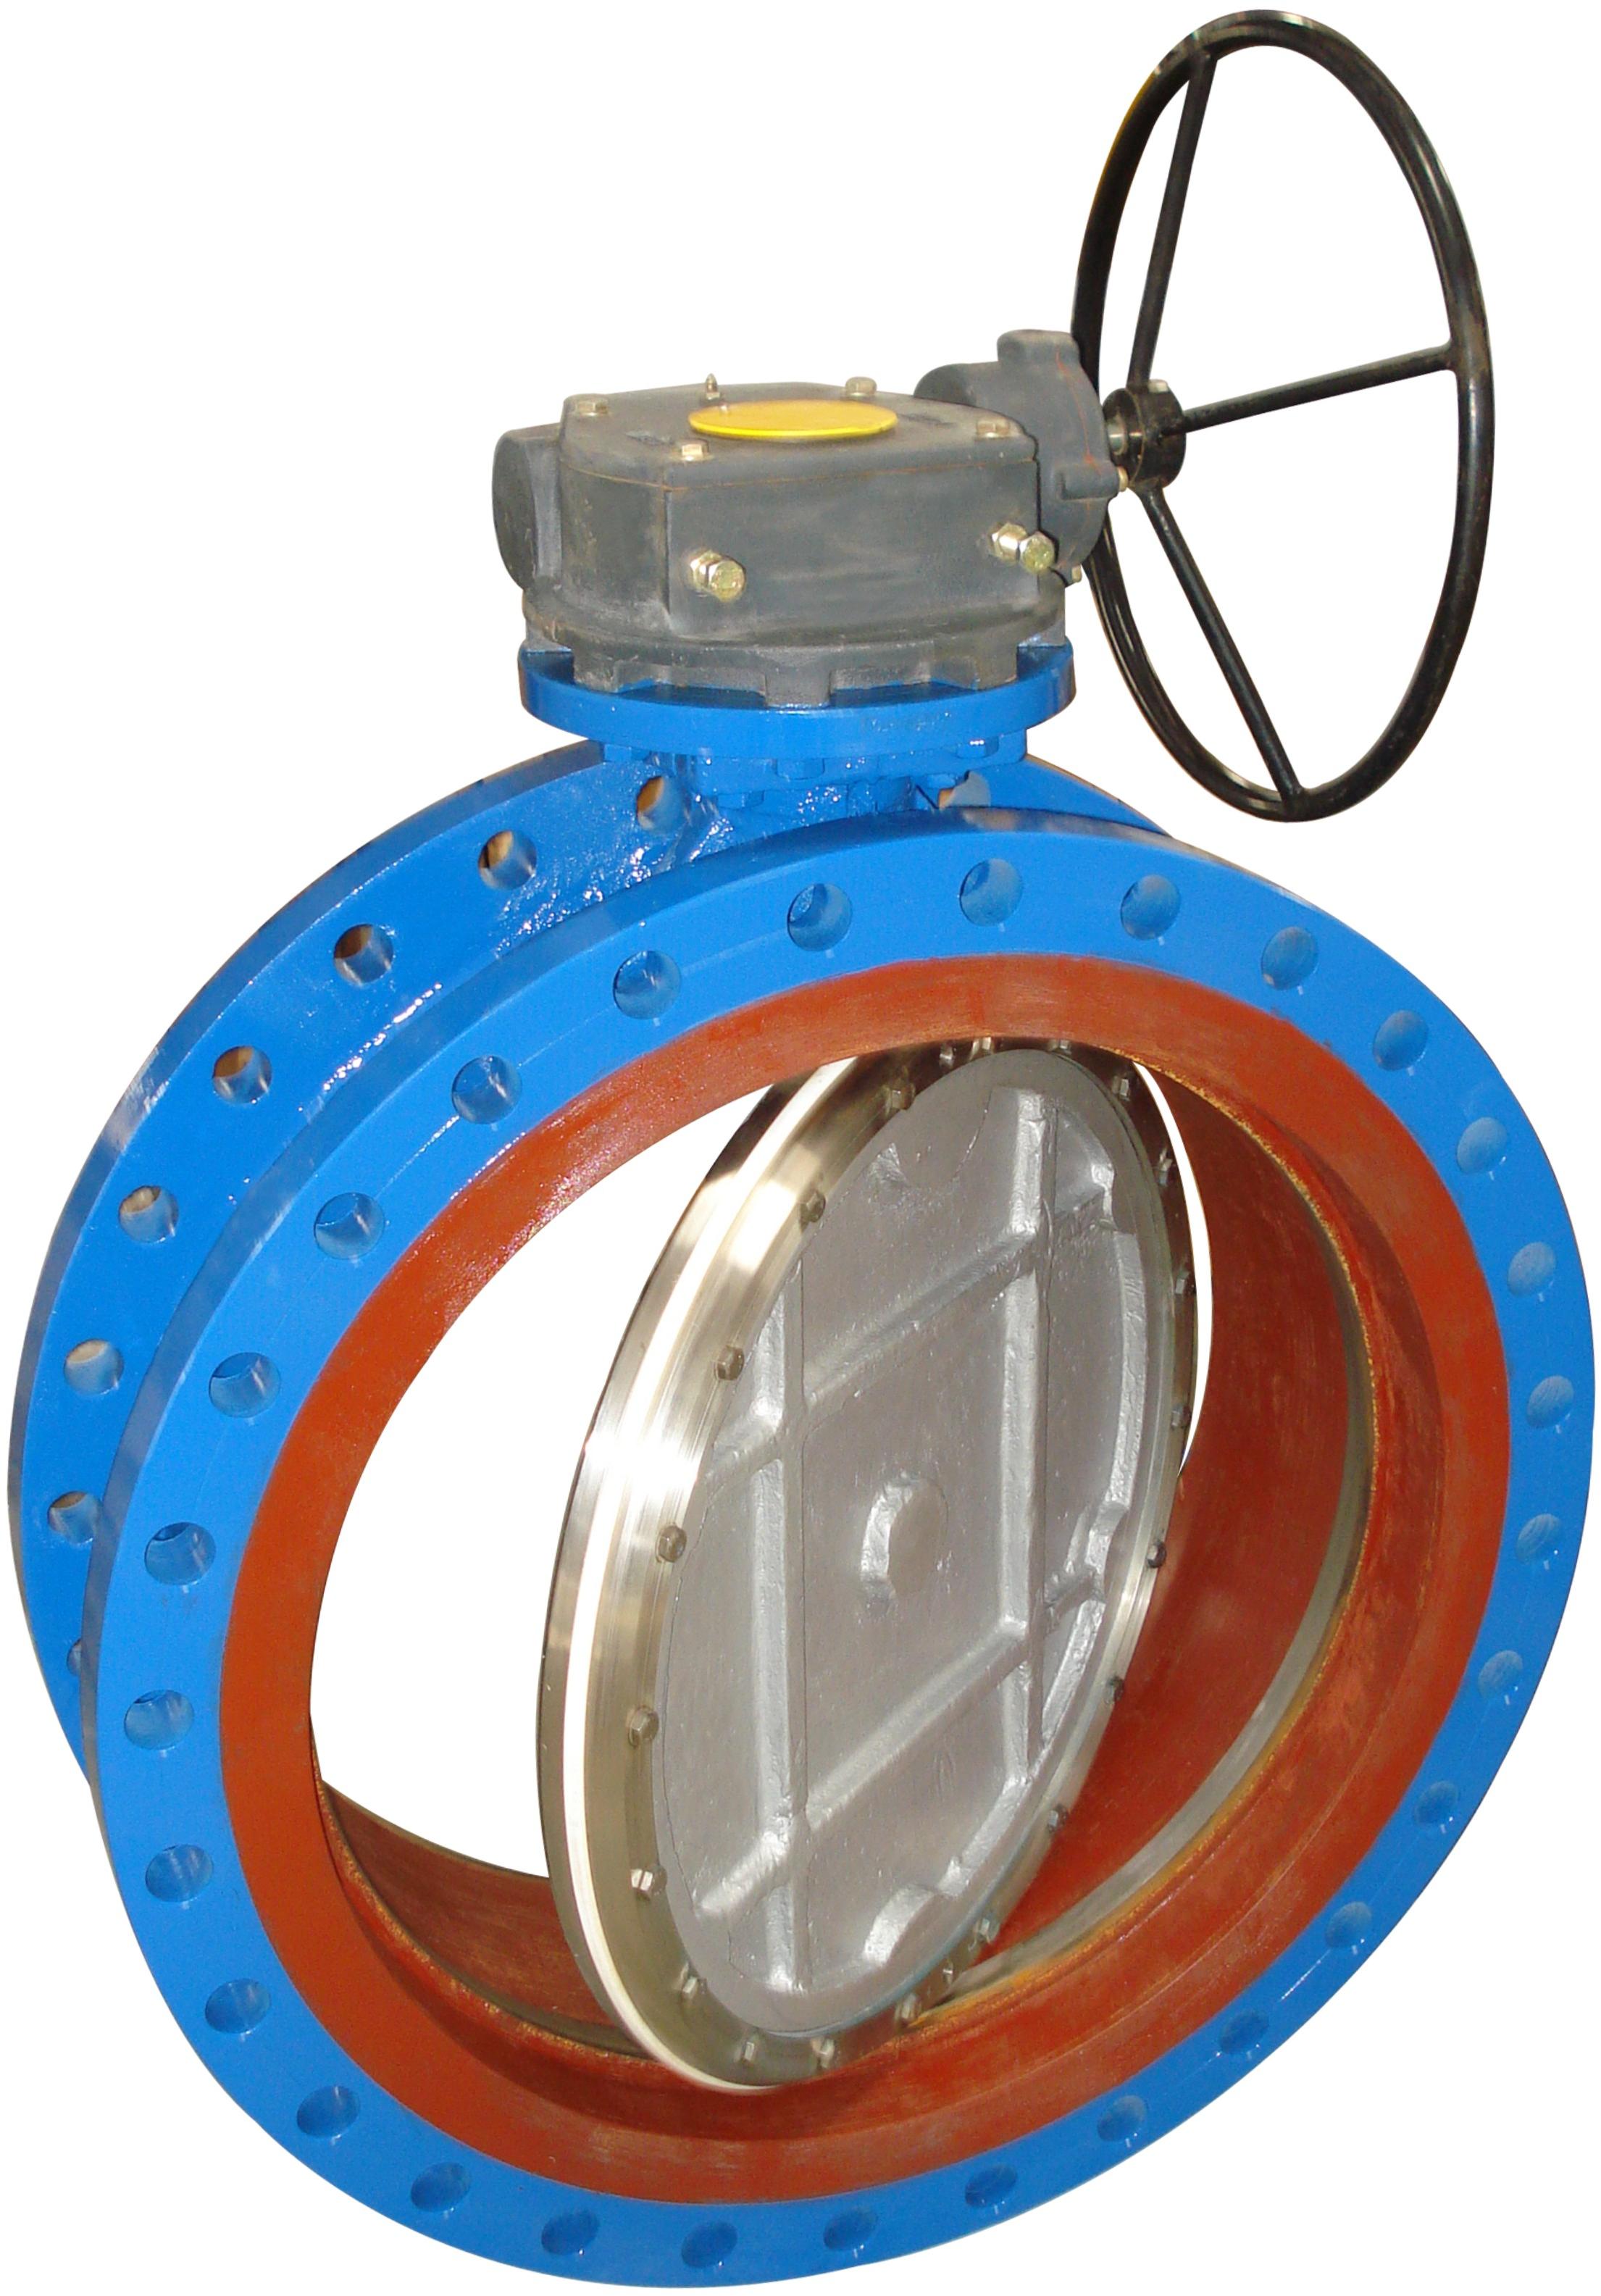 Awwa C504 Resilient Seated Butterfly Valve By Cair Euromatic Automation Pvt Ltd Id 243085 2932